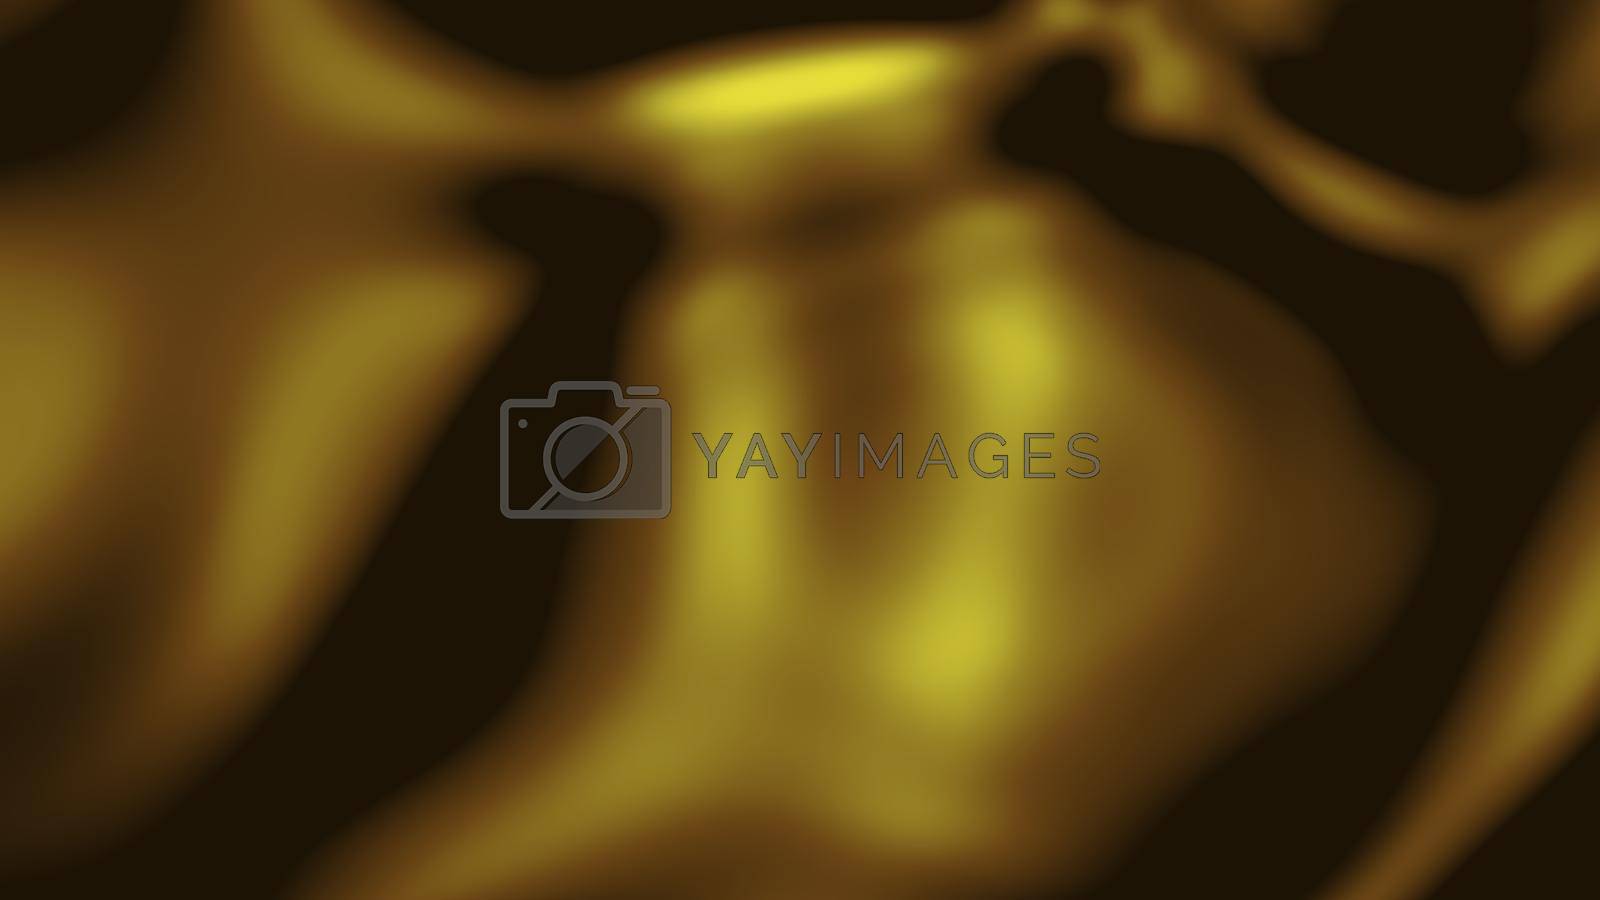 Golden abstract background. texture folded pattern